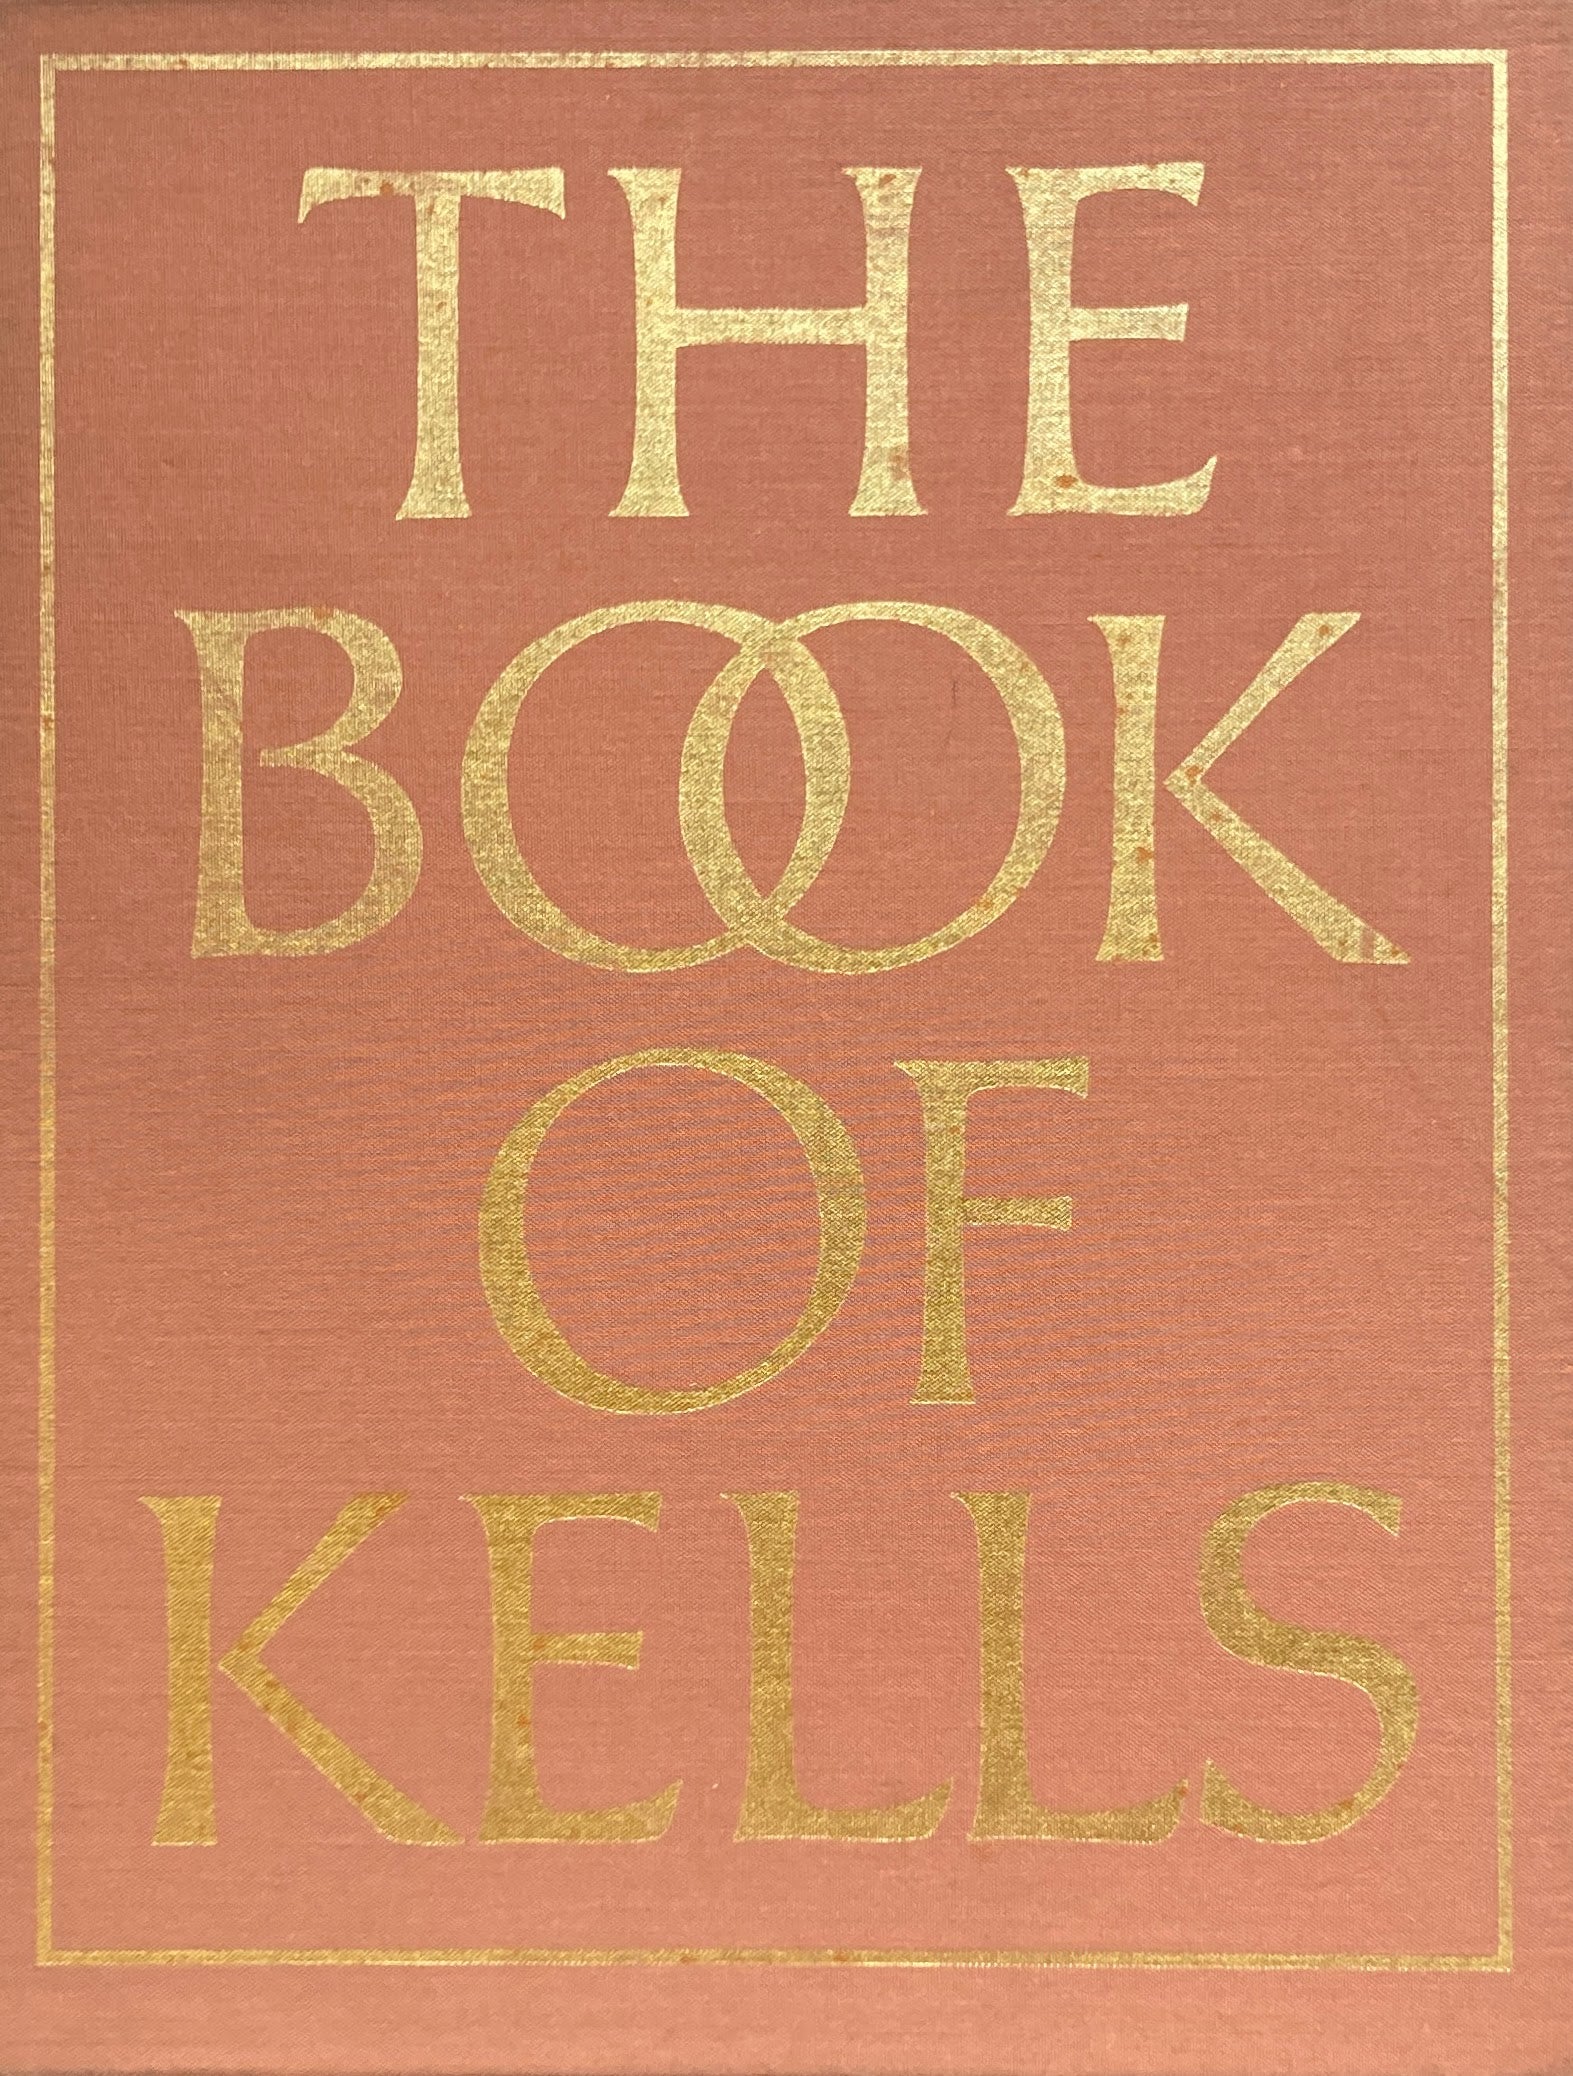 The Book of Kells　ケルズの書